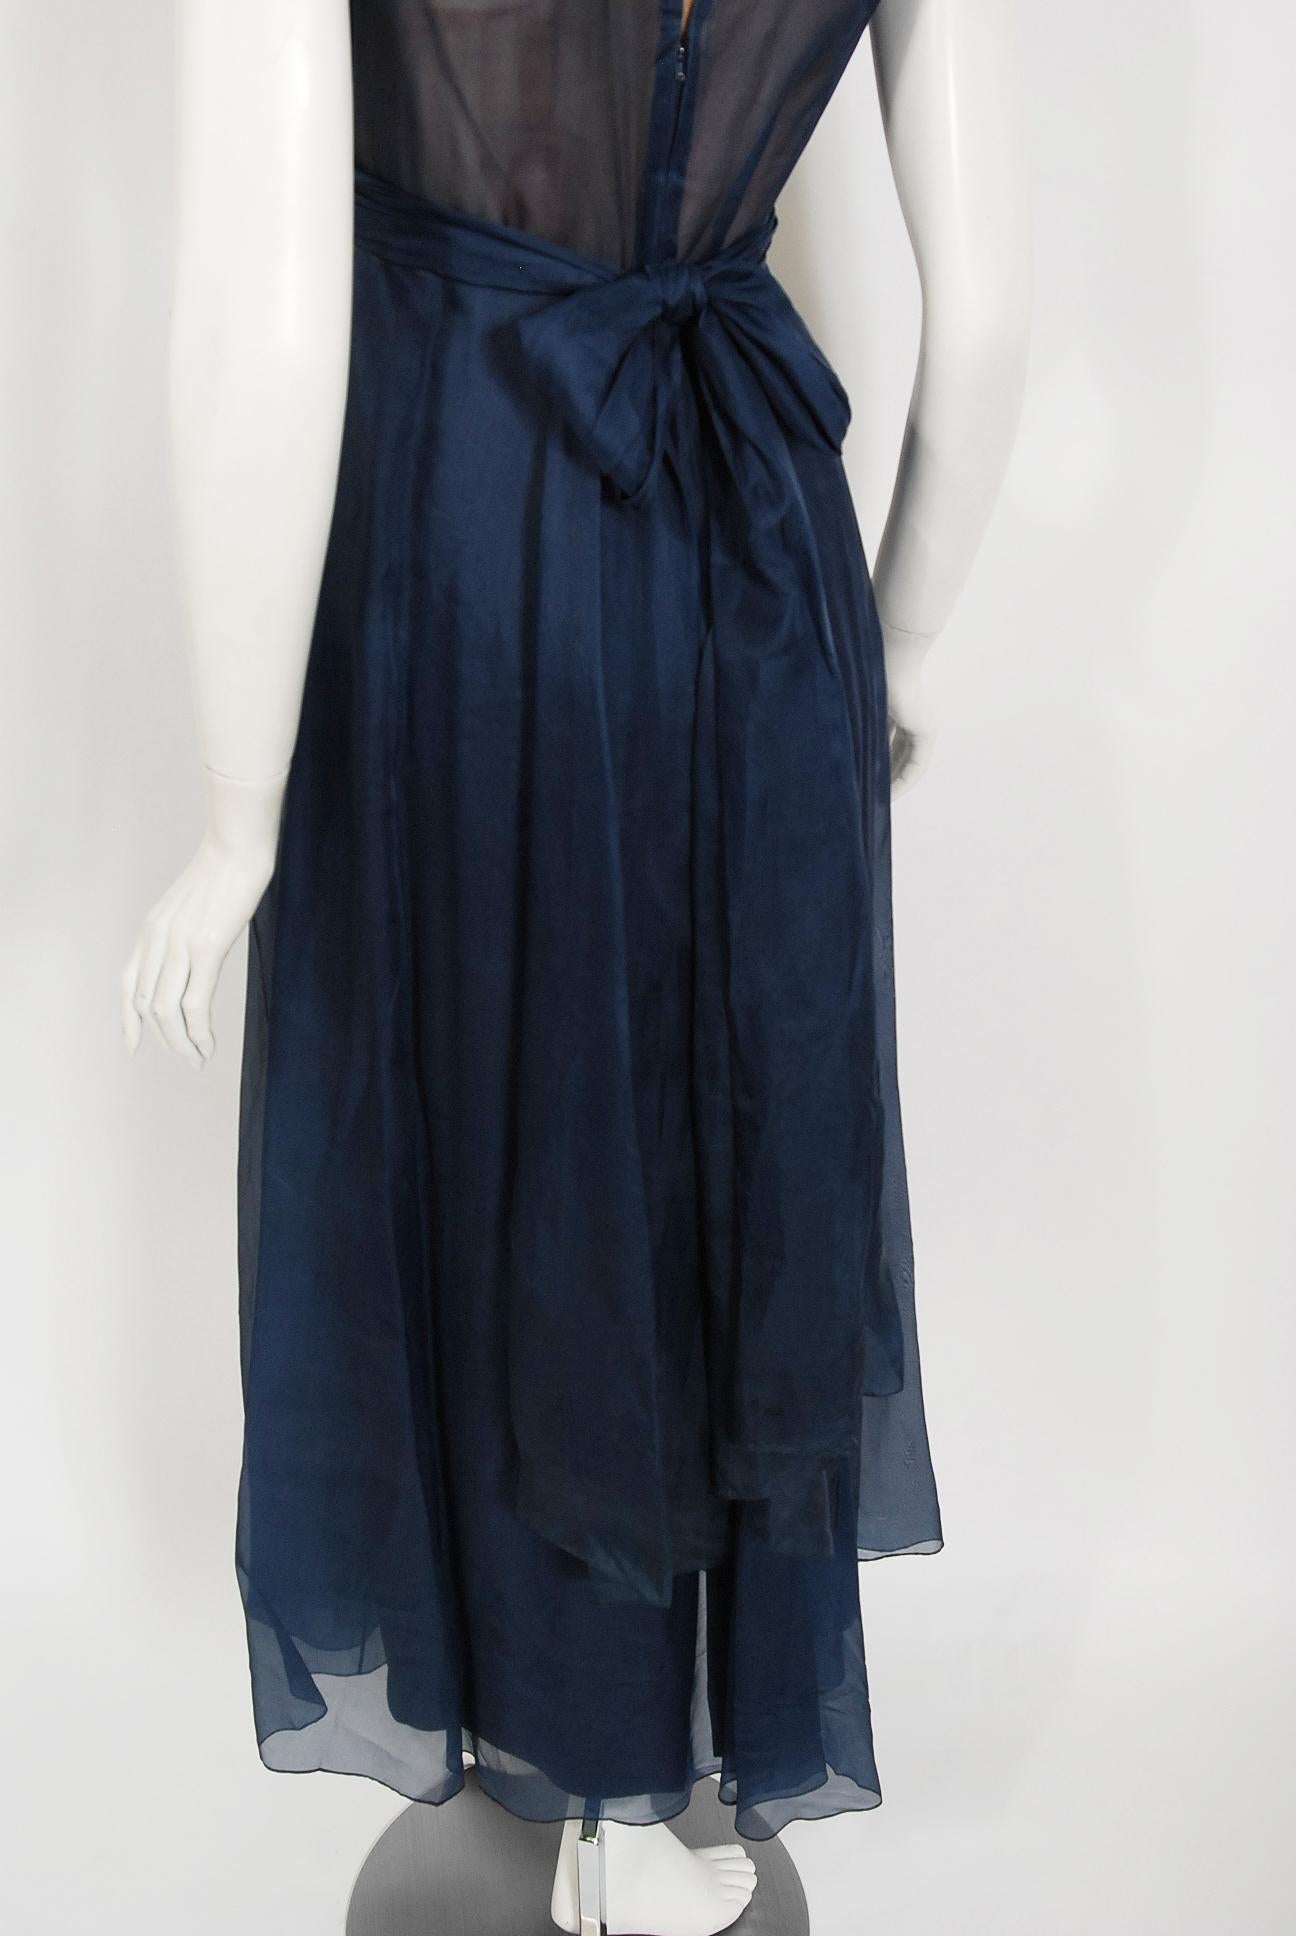 Vintage 1970s Madame Grès Haute Couture Beaded Berry Motif Navy Sheer Silk Gown For Sale 1